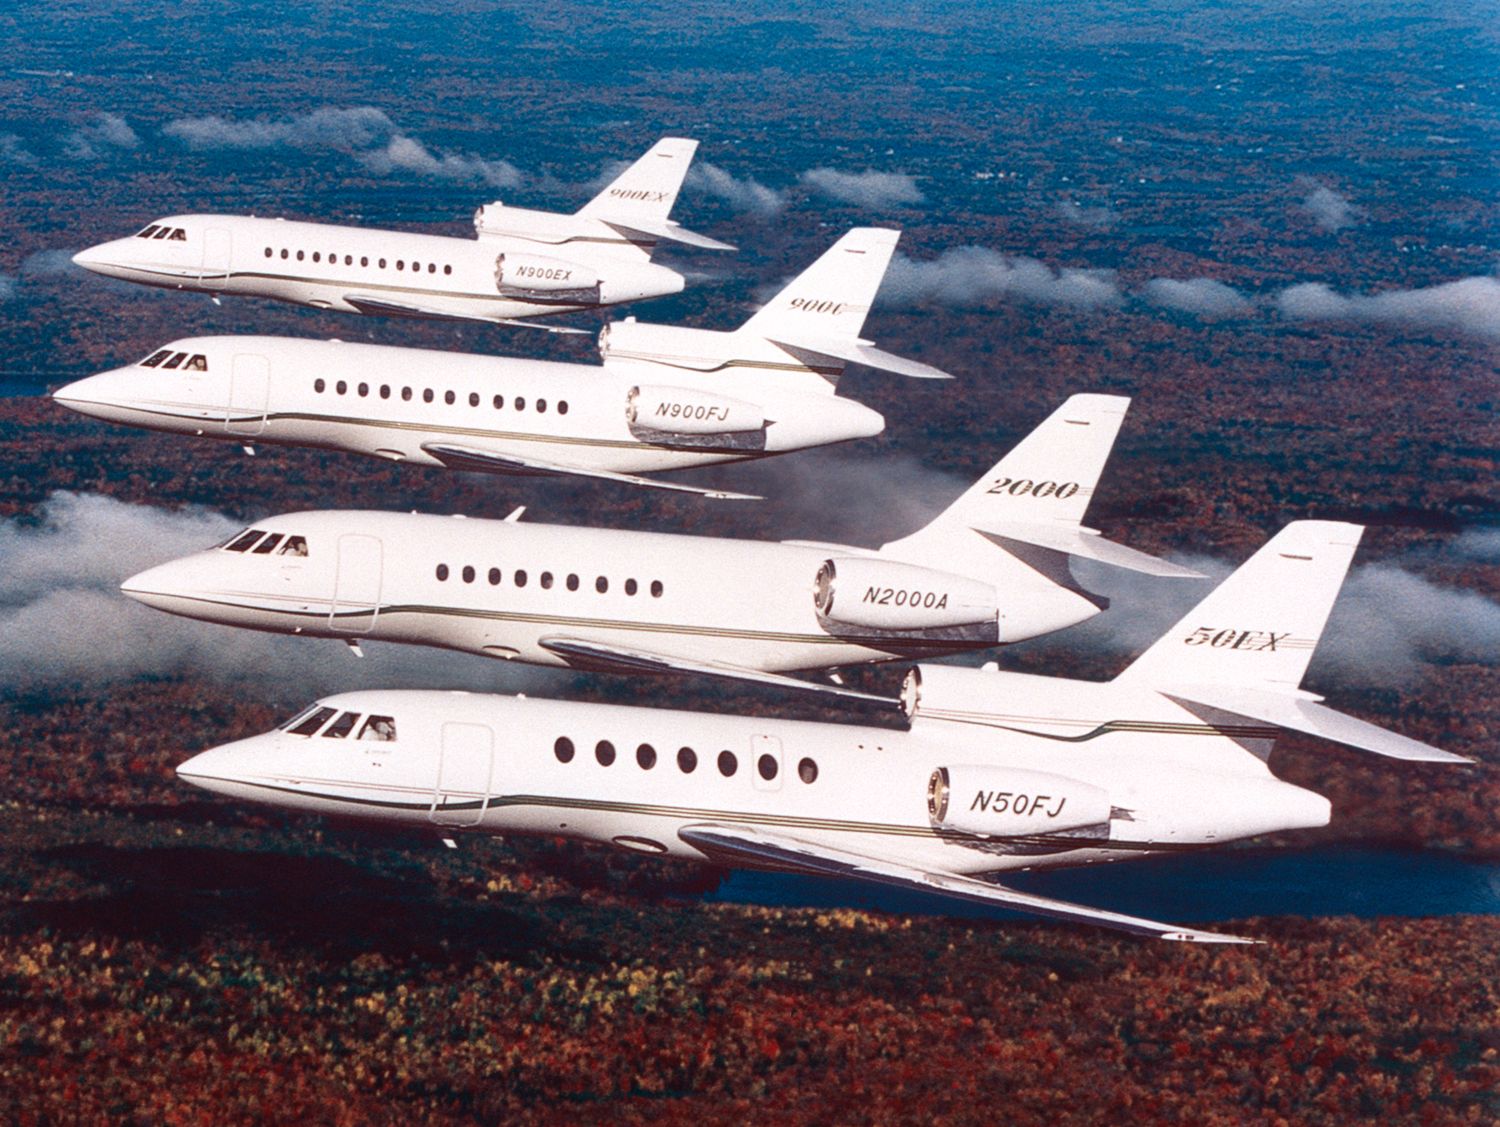 Four Dassault Falcon jets flying in formation.